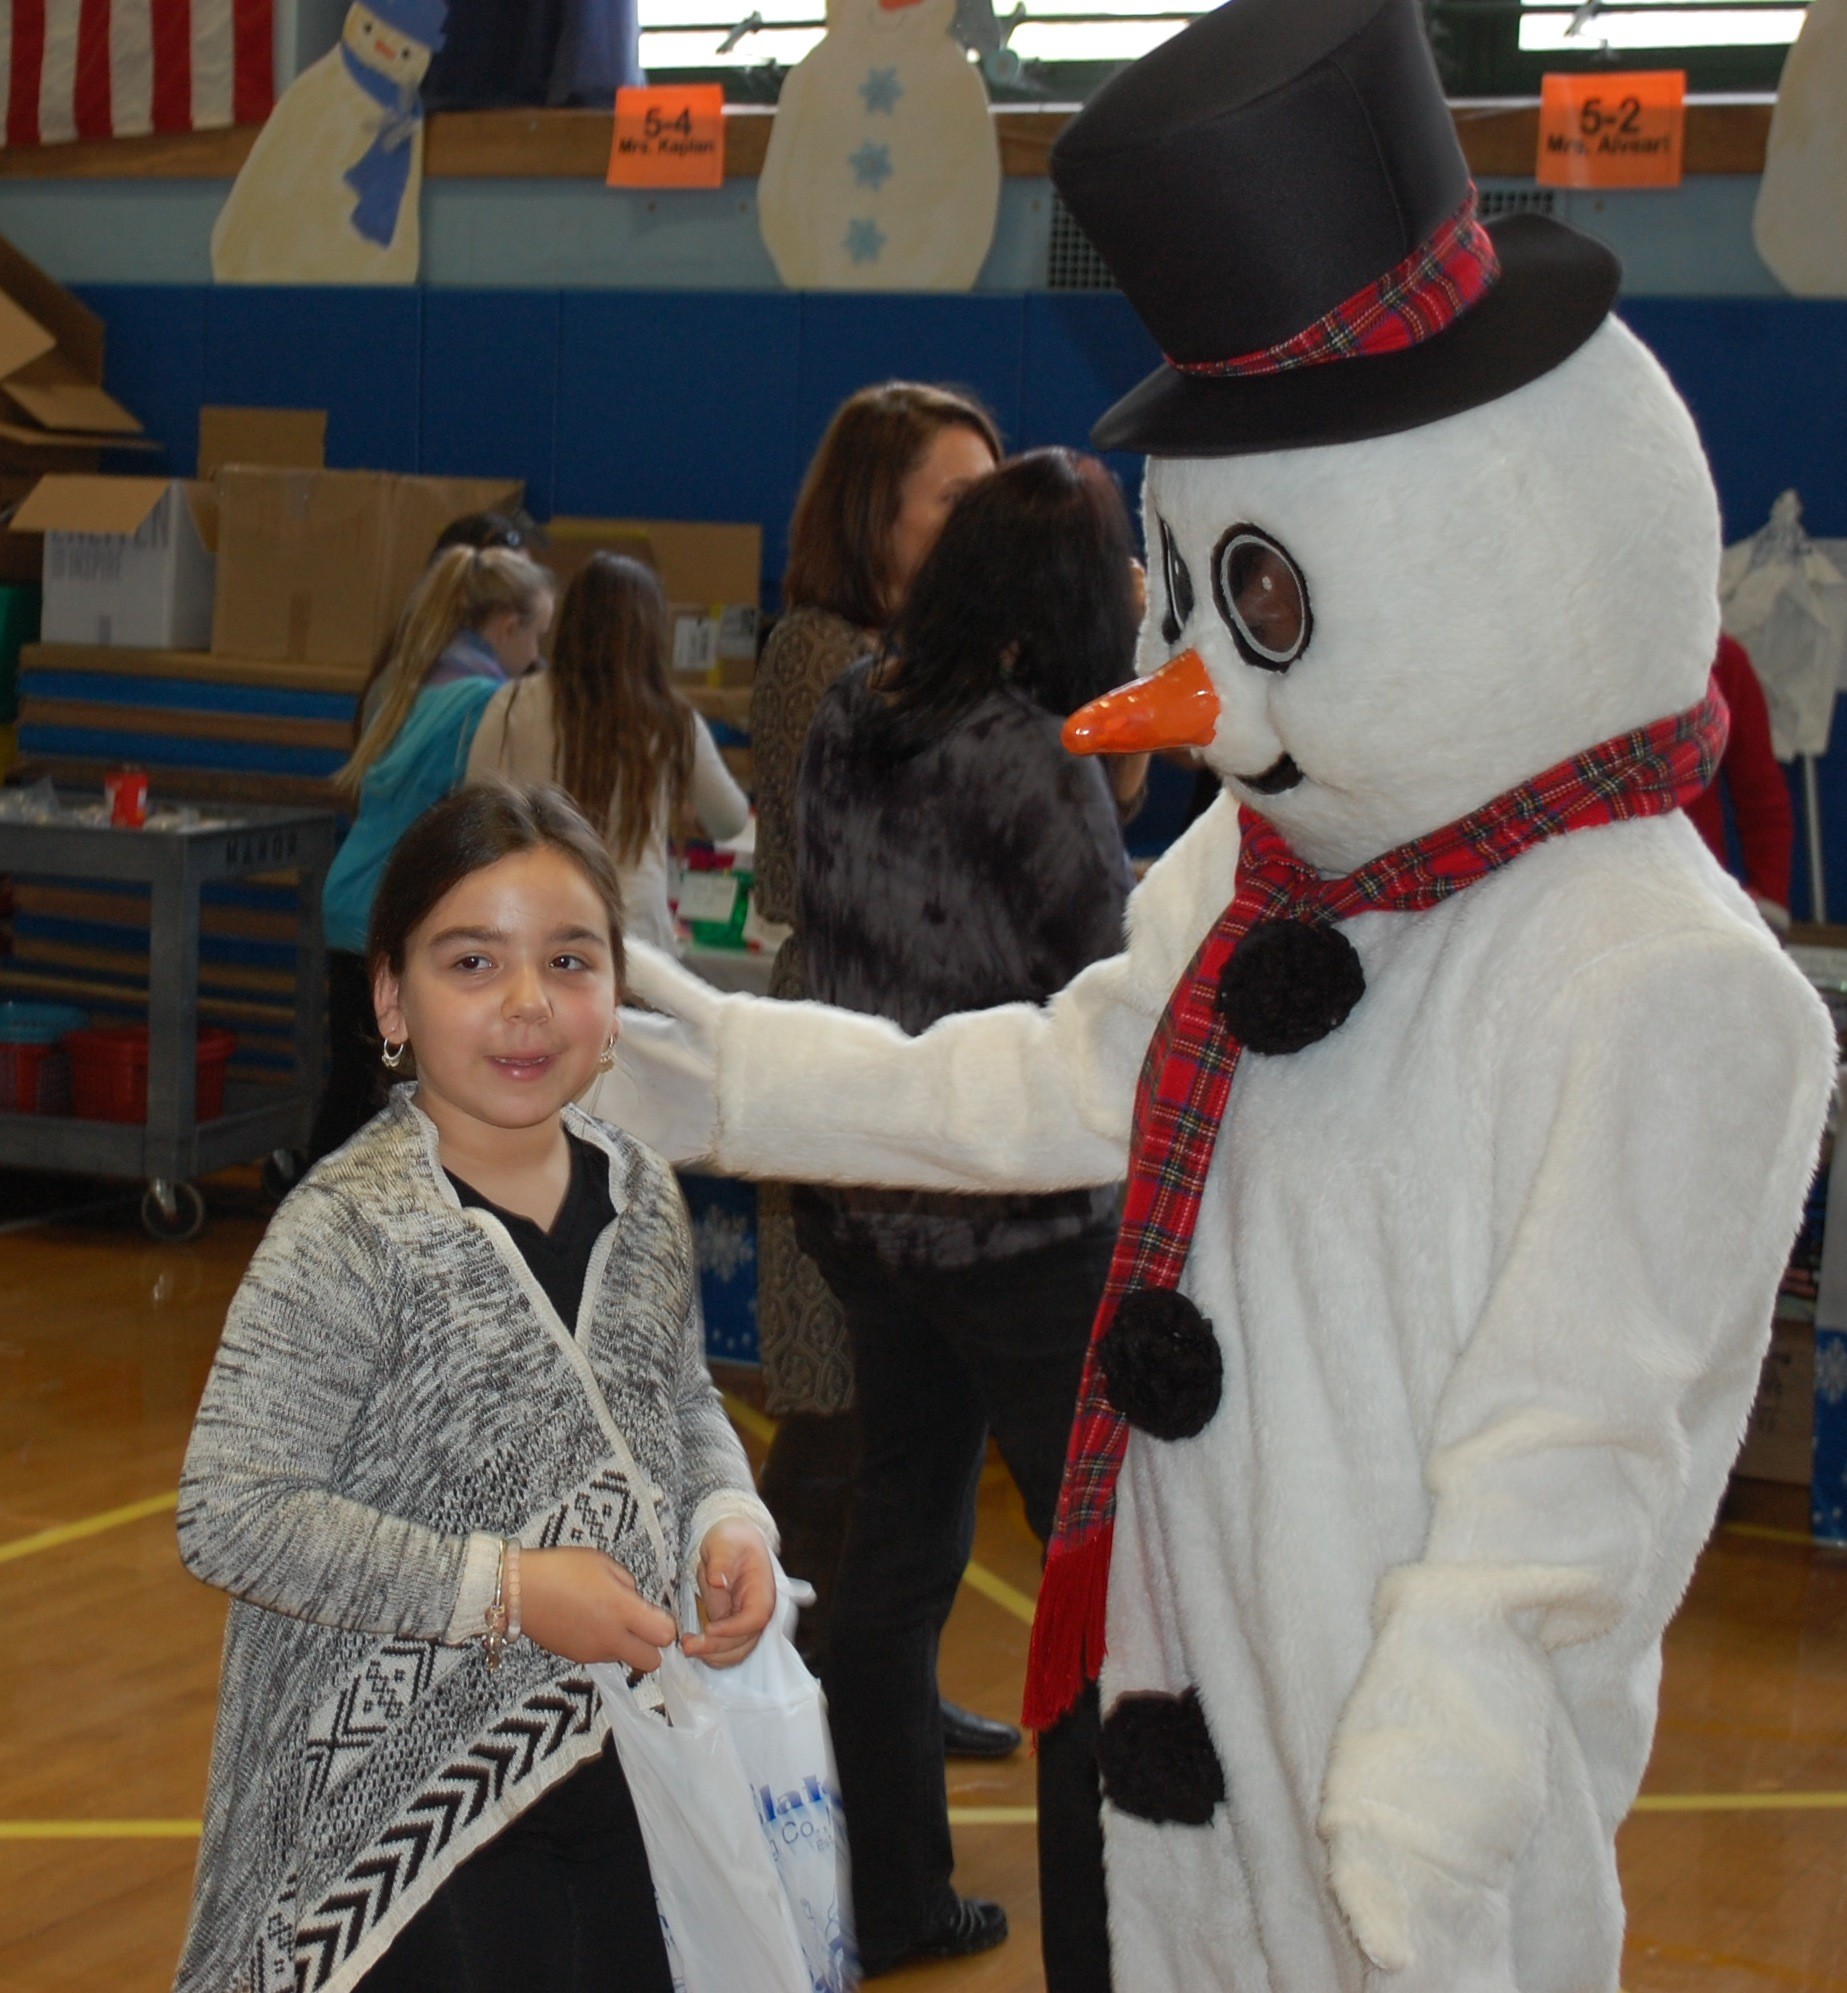 Frosty the Snowman greeted students.